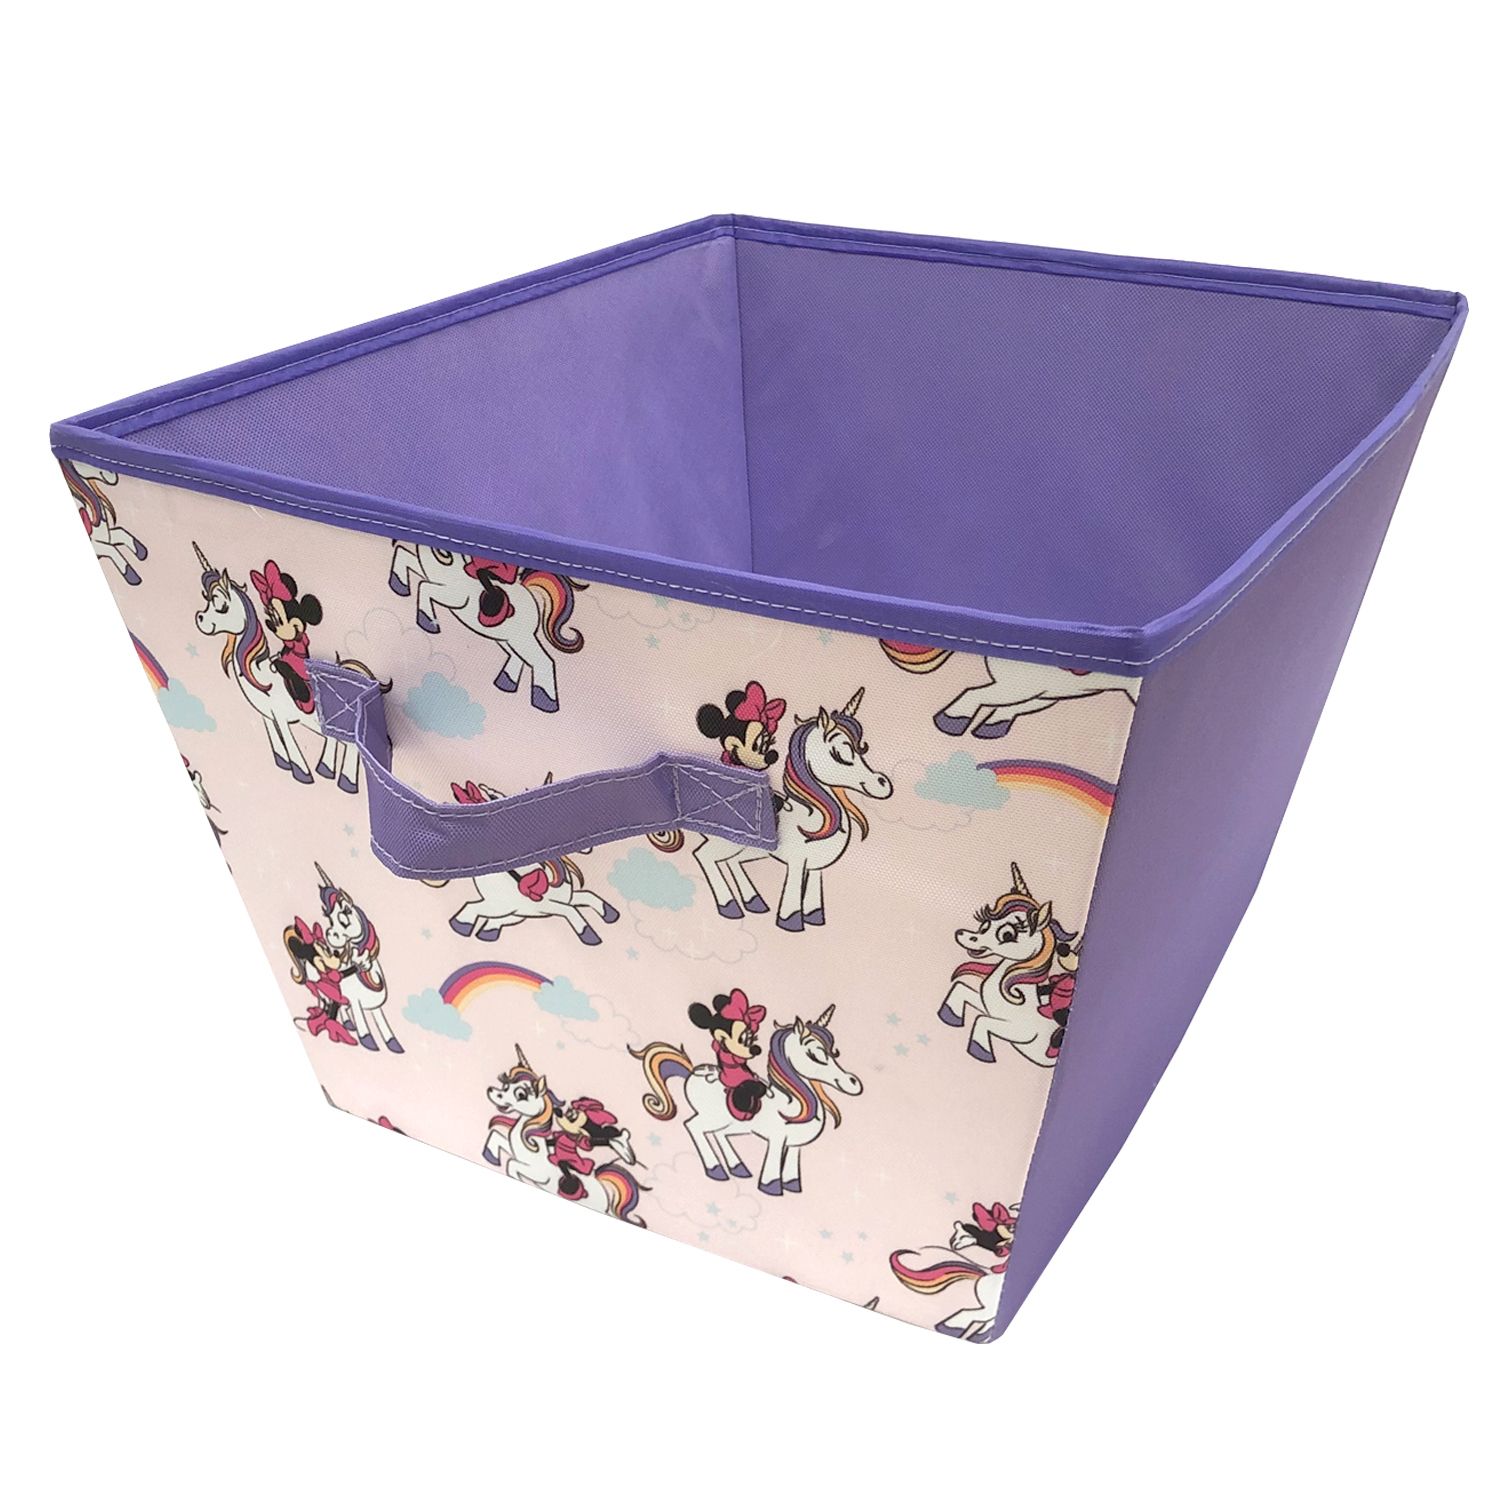 Image for Disney 's Mickey Mouse or Minnie Mouse Tote Bin at Kohl's.